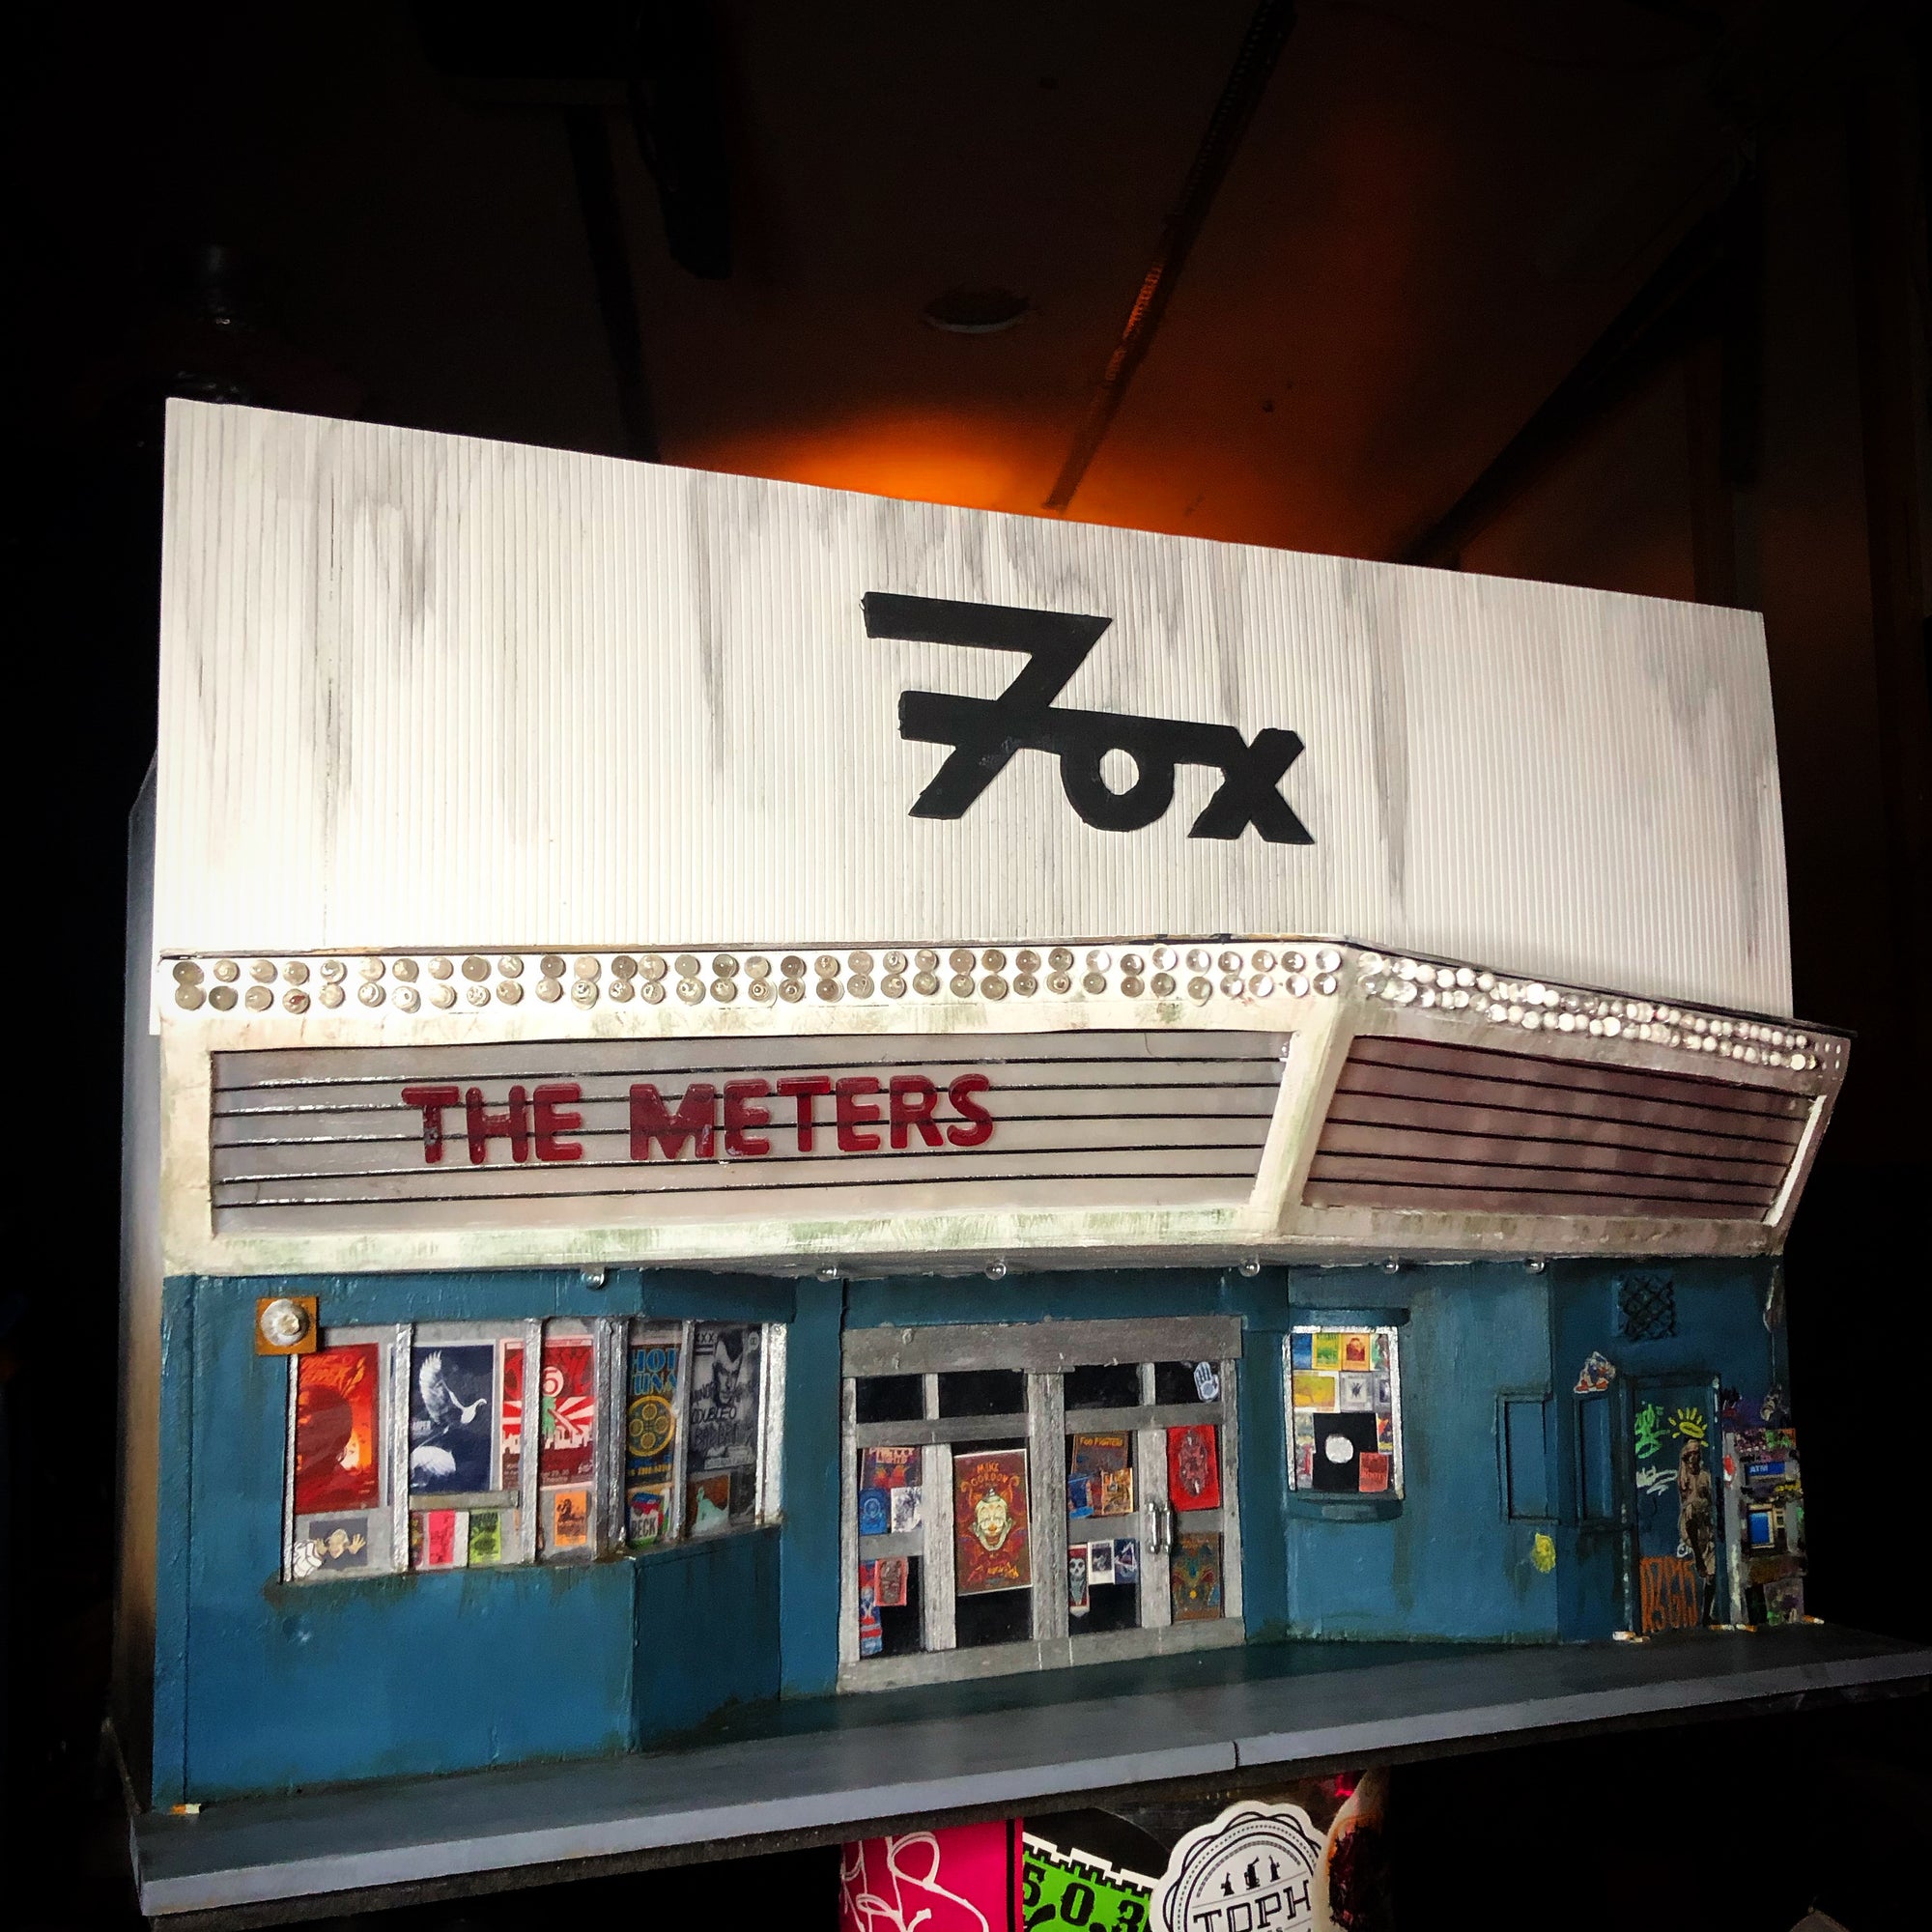 Miniature Model of the Fox Theater with billboard letters showing The Meters are playing. 